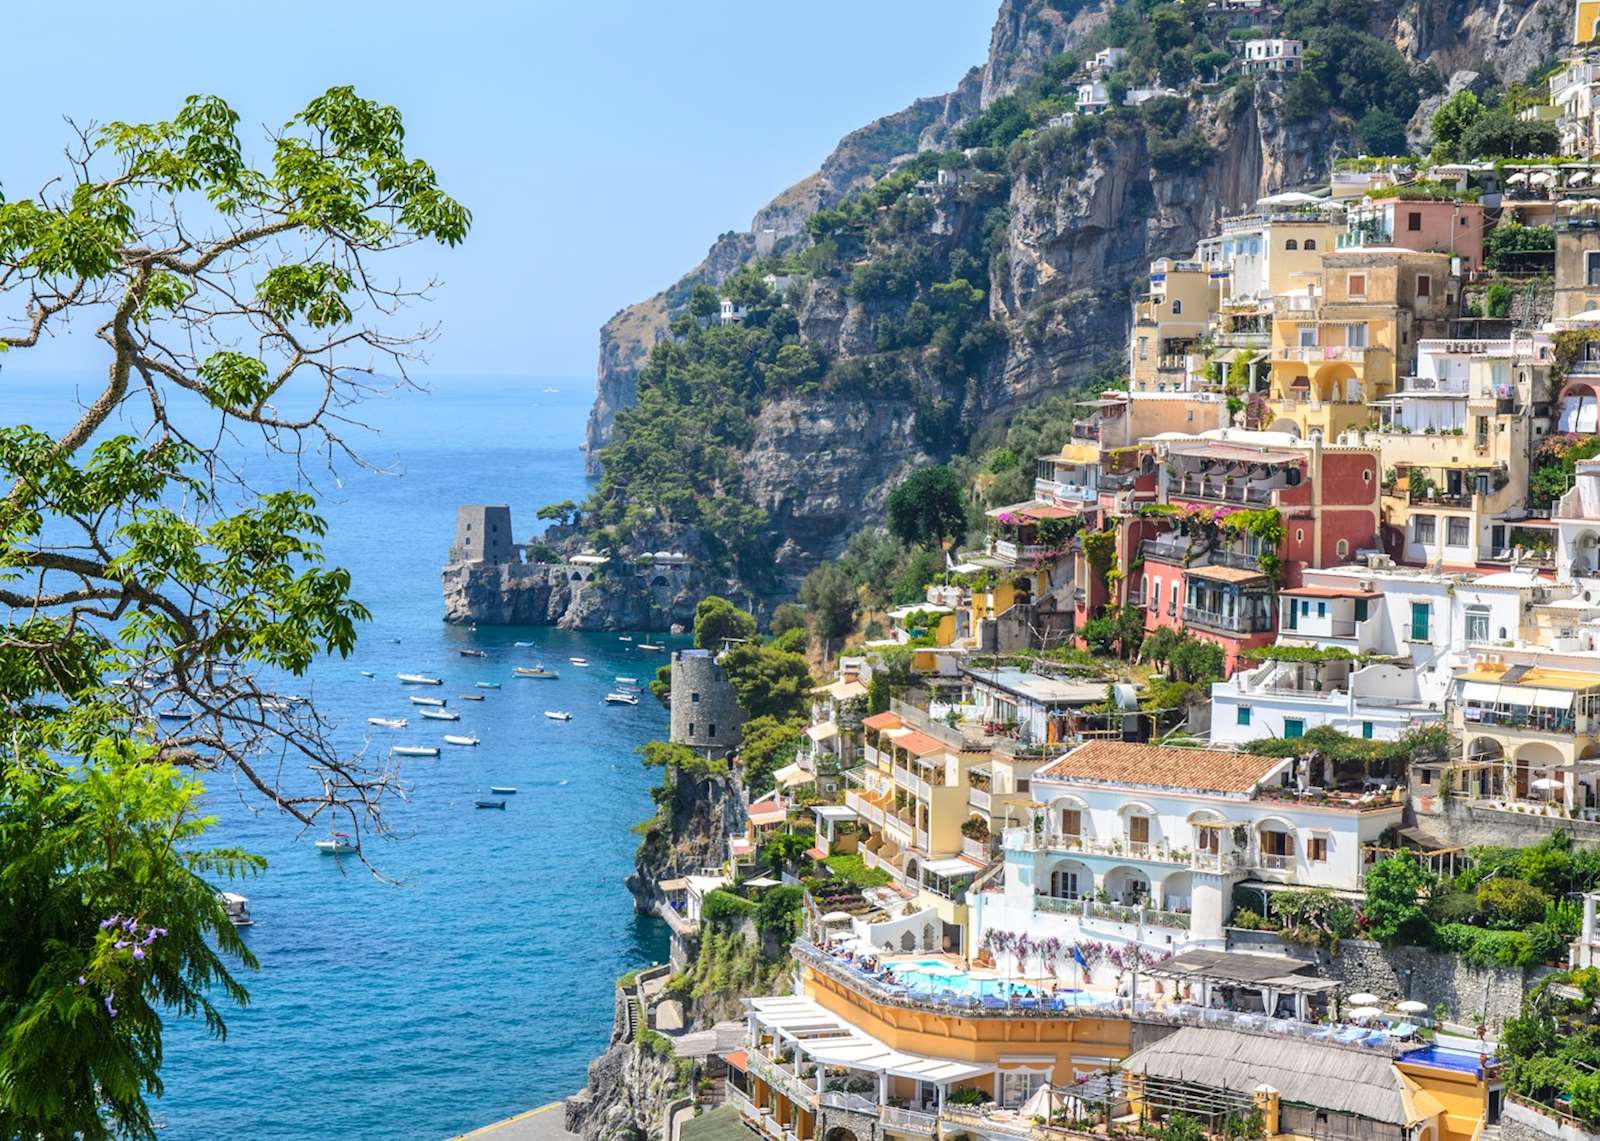 Southern Italy and Amalfi Coast Tour | Audley Travel US